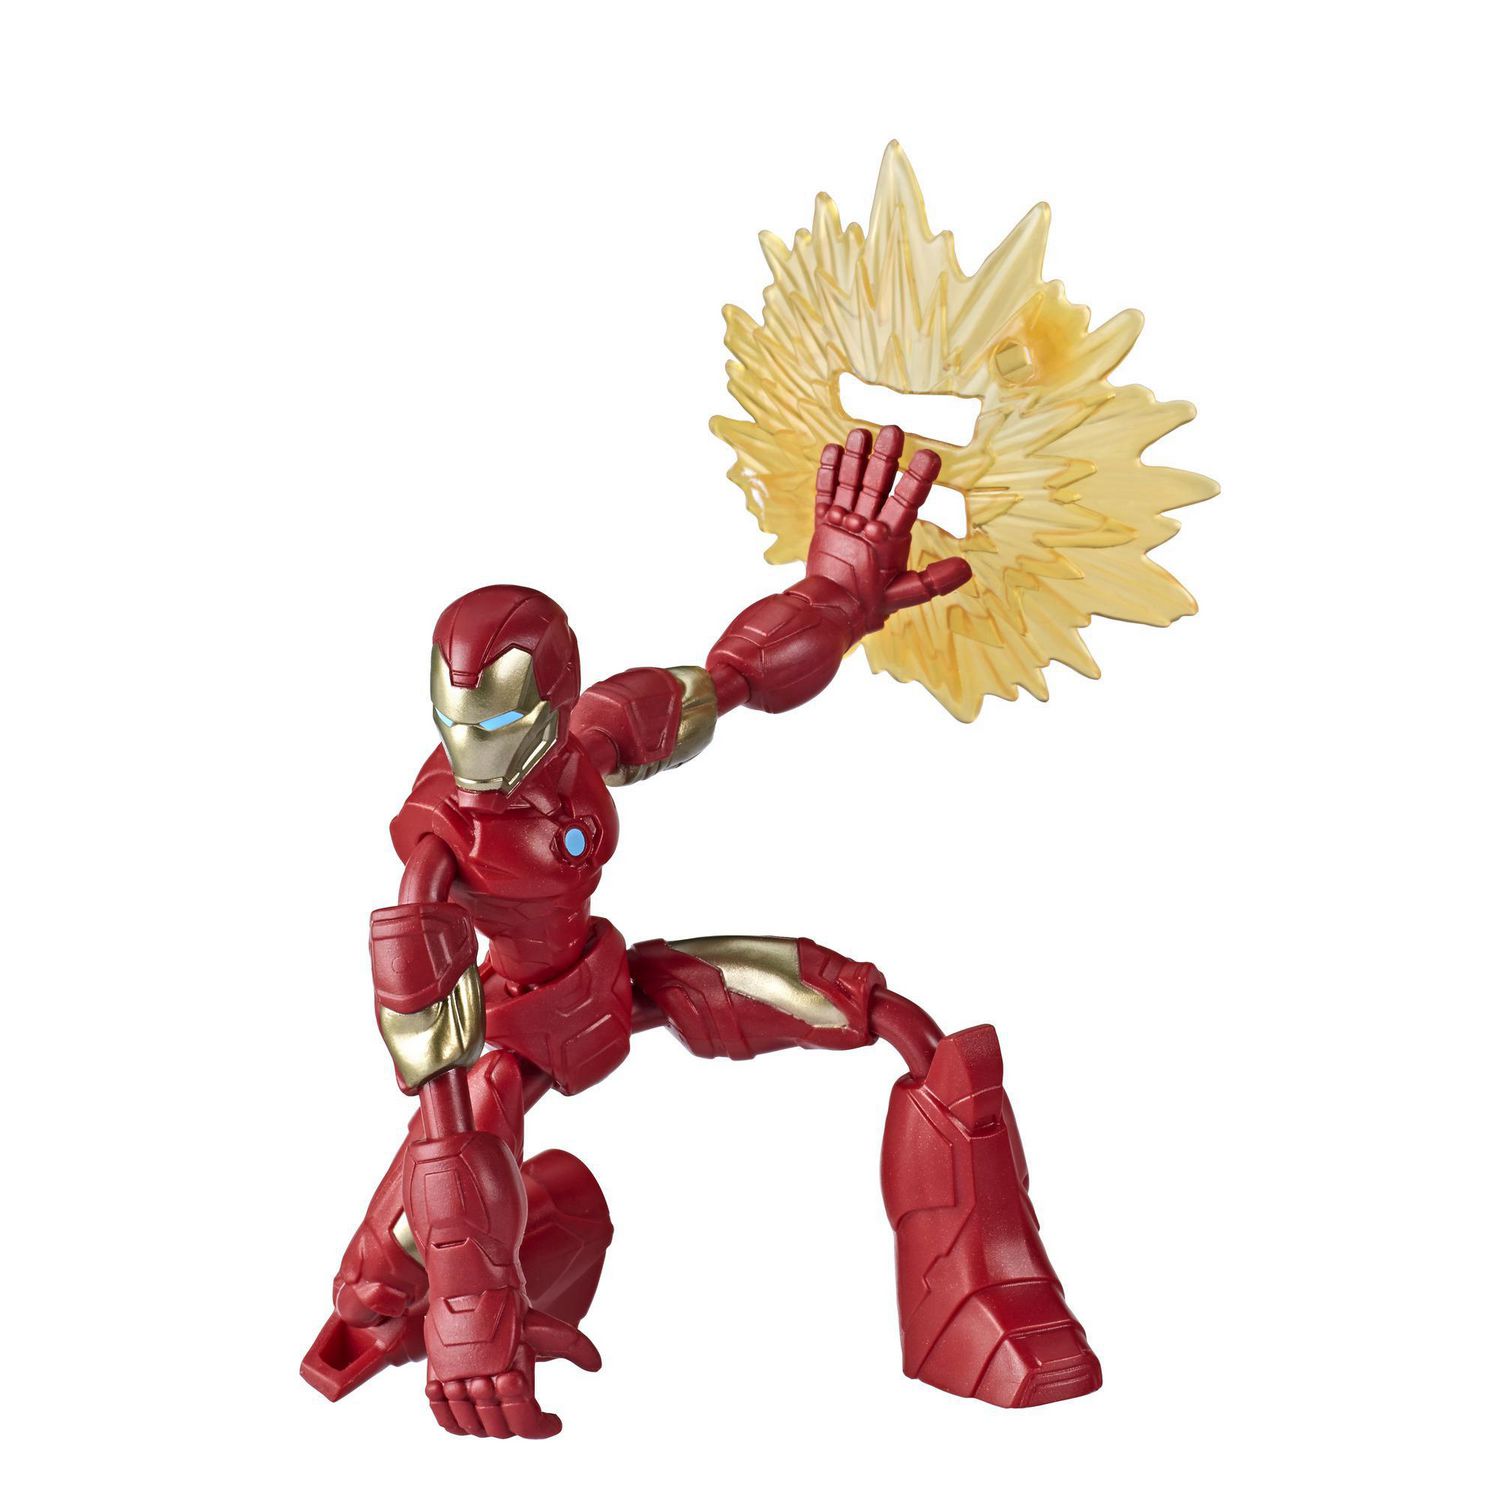 Marvel Avengers Bend And Flex Action Figure Toy, 6Inch